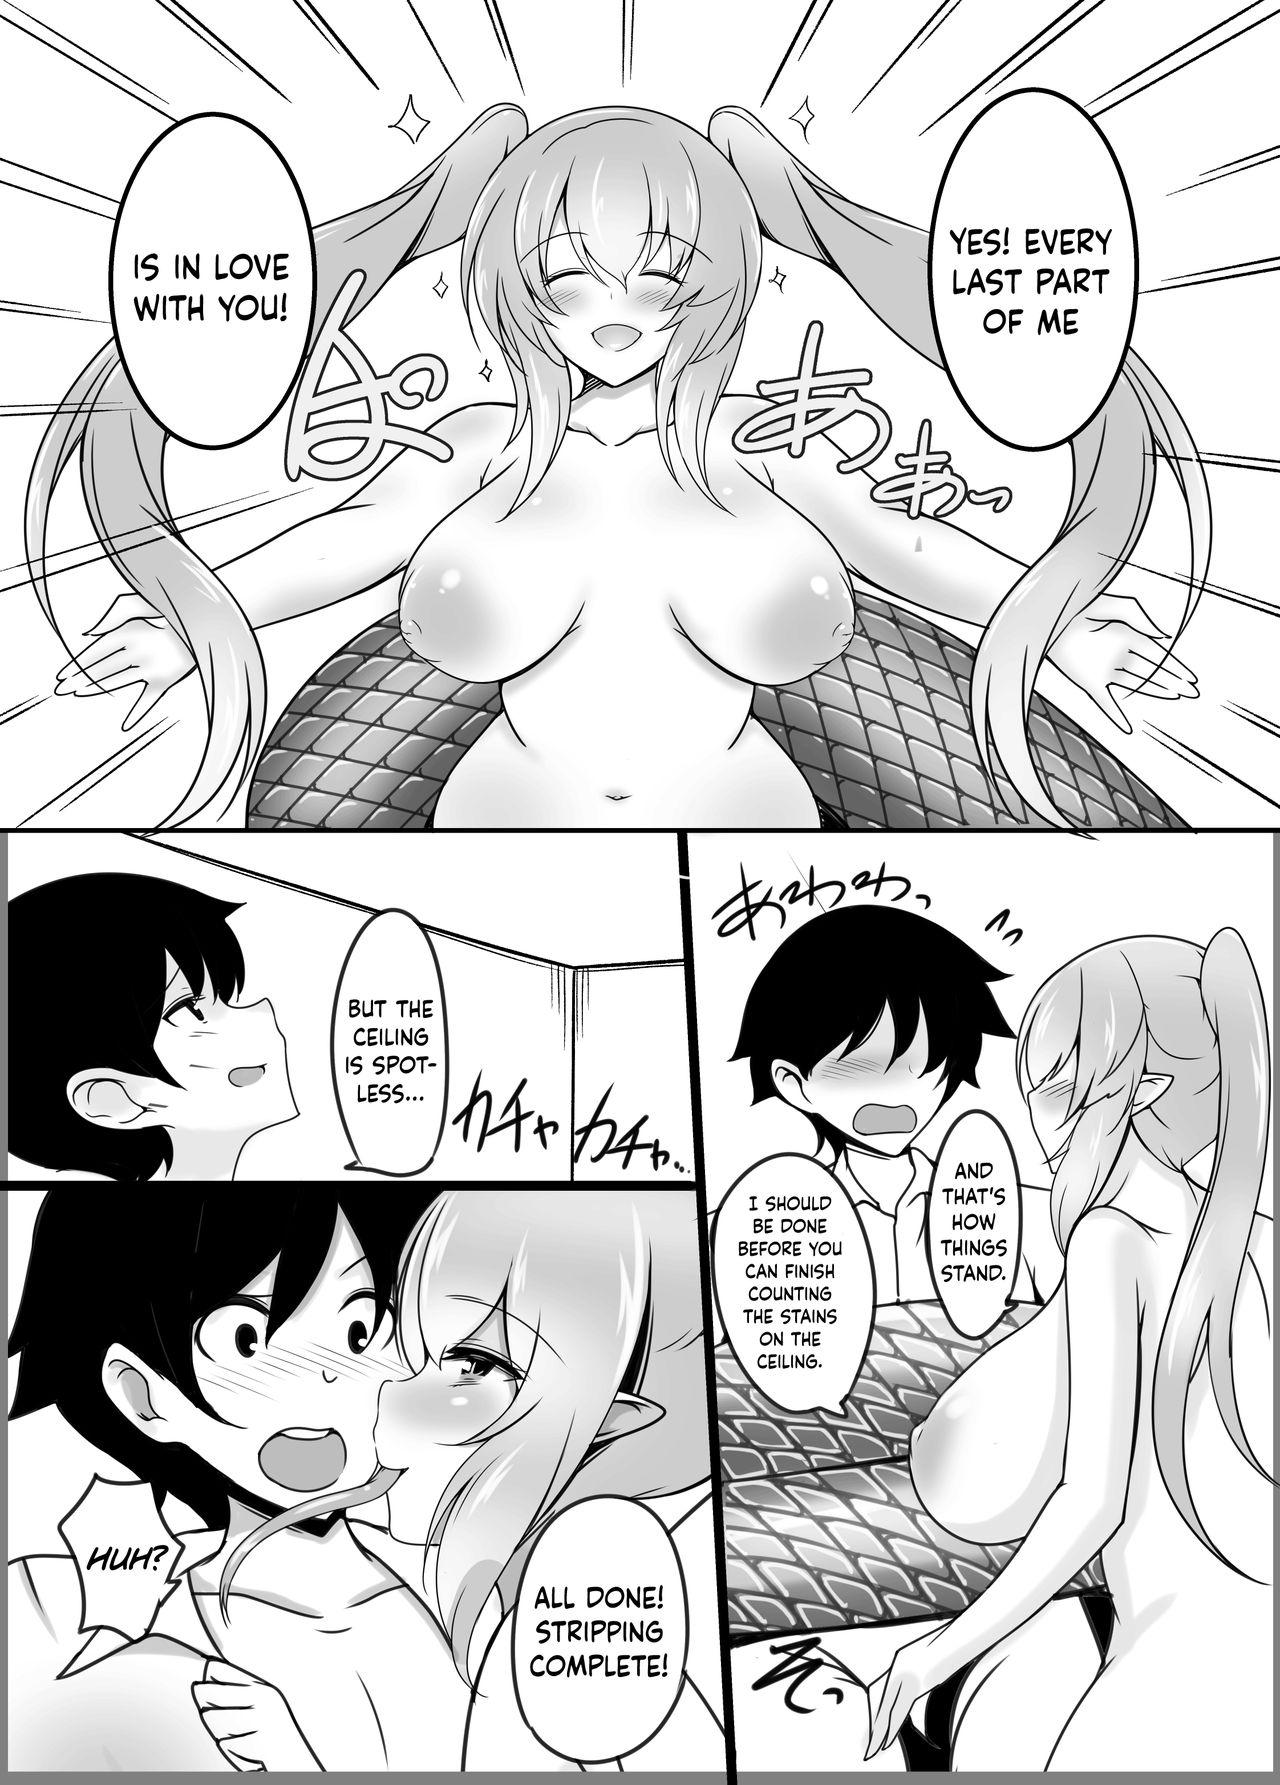 A Lamia's Tail Ties the Knot 5